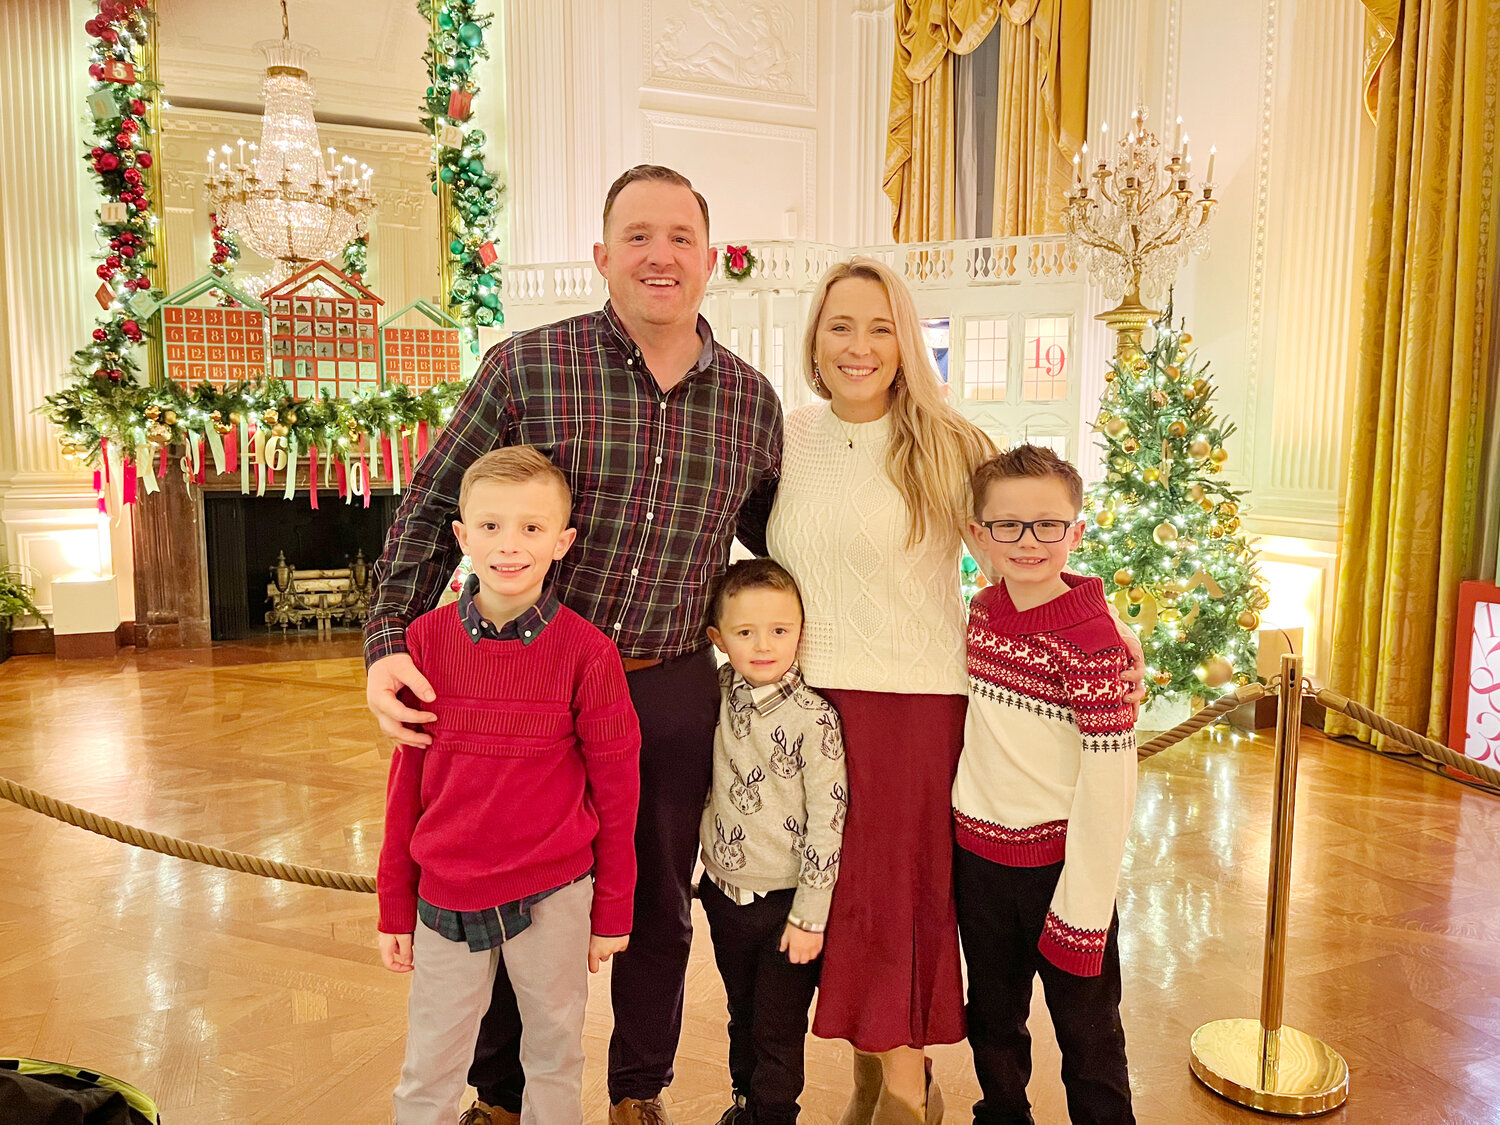 Skylar Martin, far right, was one of hundreds of applicants chosen to decorate the White House in Washington D.C. Martin and her husband, Kyle Martin are both Pleasant Hill natives. The Martins and their three sons, Cohen, 5, Aiden,  7, and Liam, 9,  visited the White House on Sunday to look at the decorations.